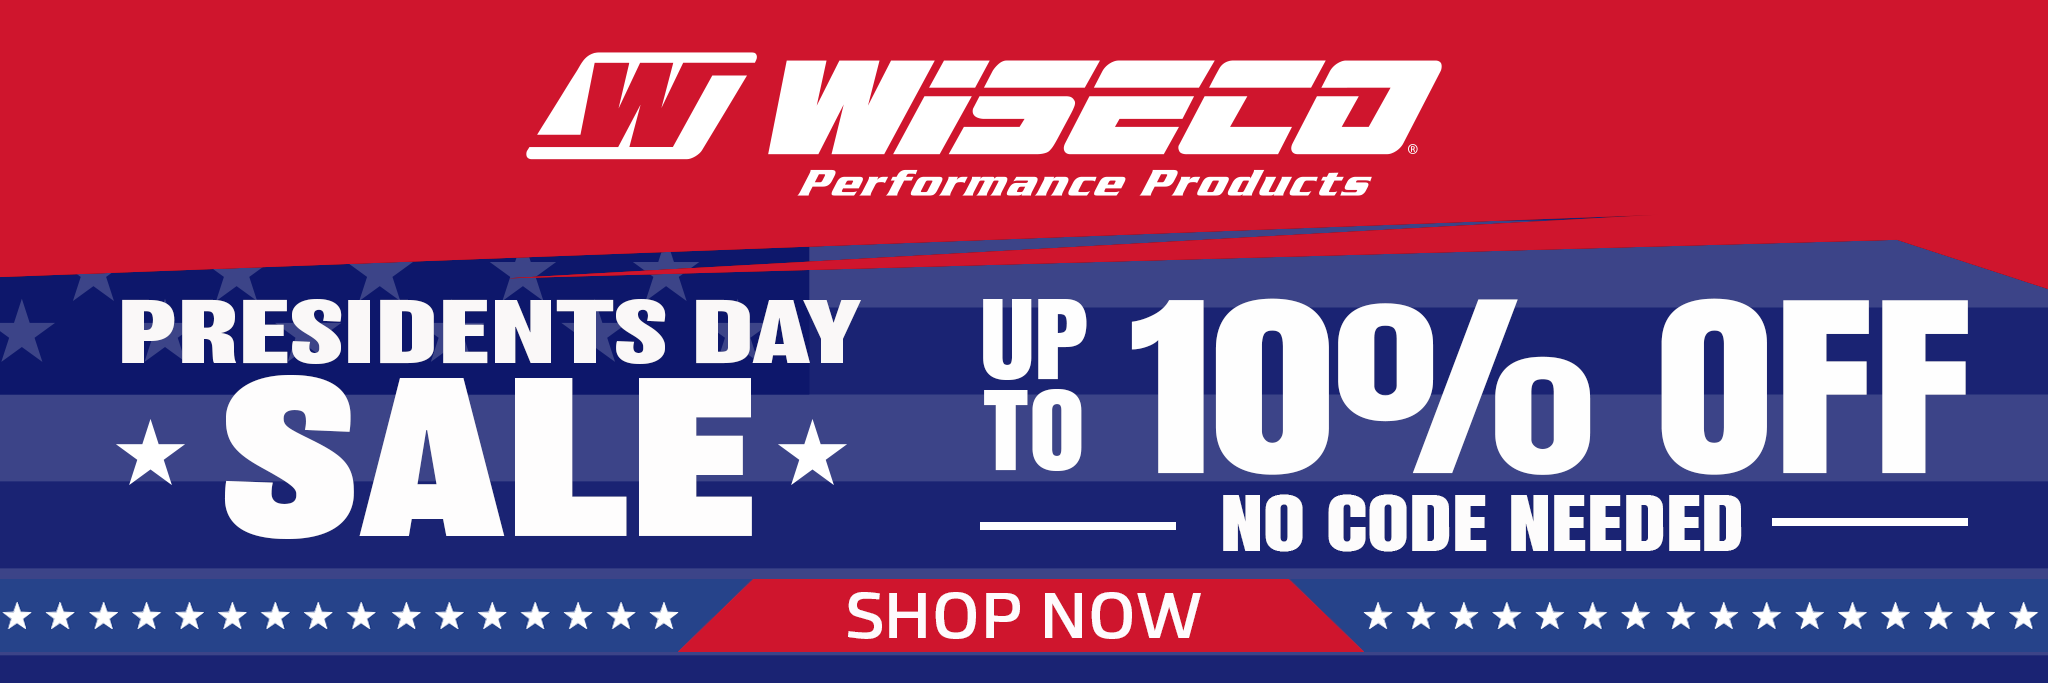 Wiseco Presidents Day Sale